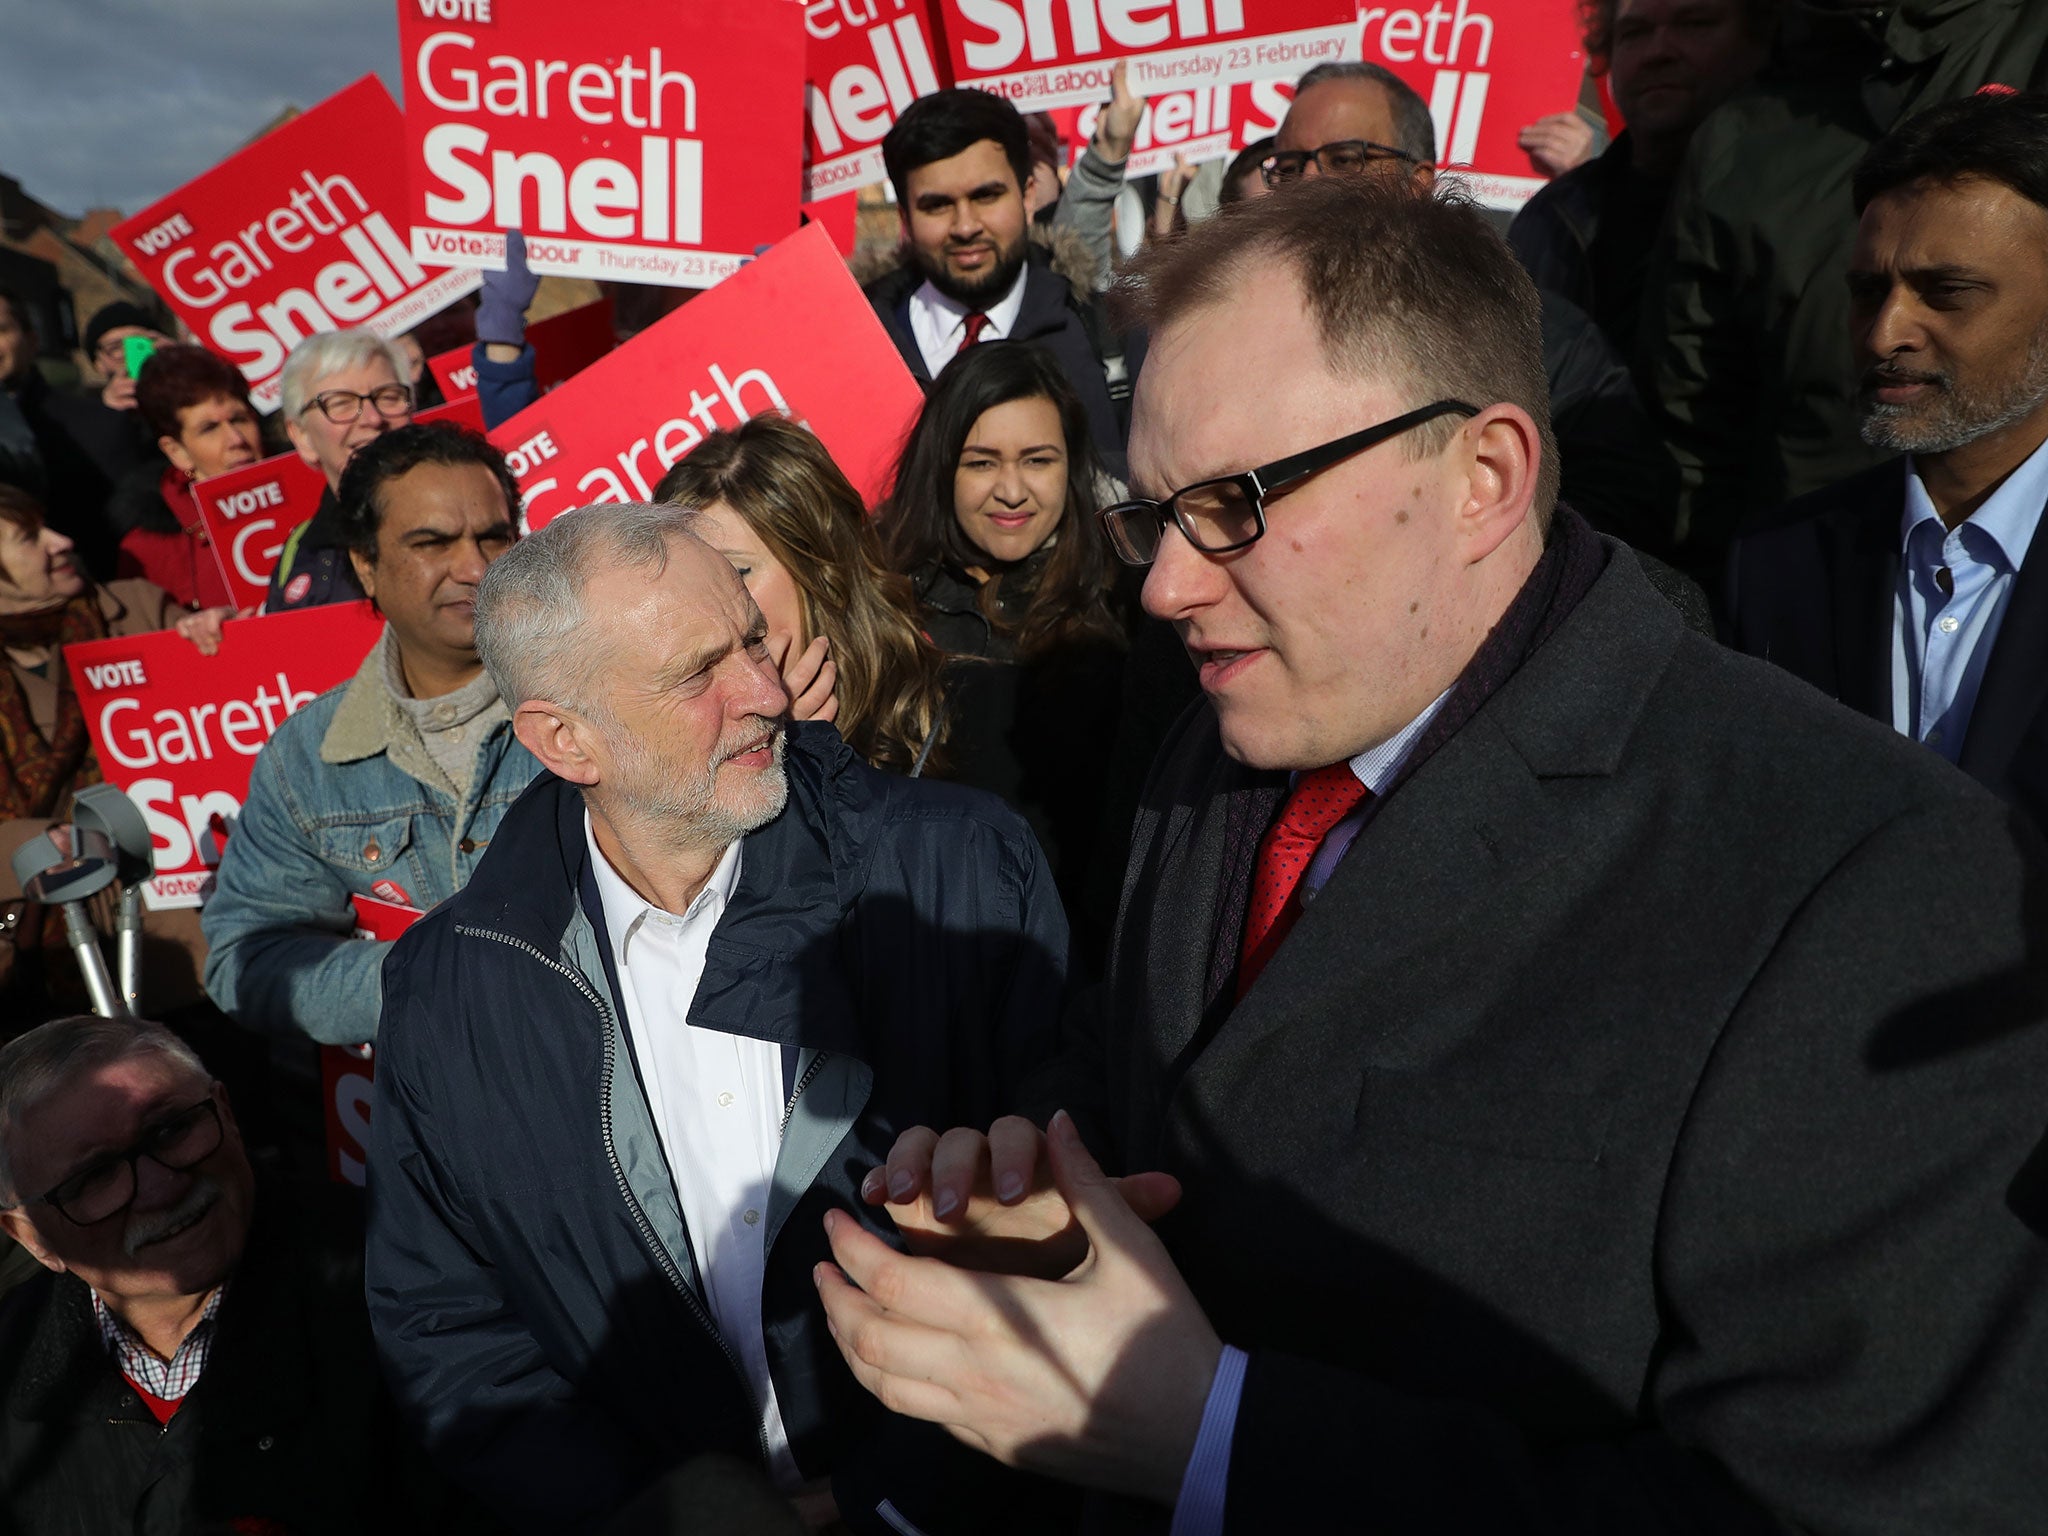 Jeremy Corbyn and newly elected MP for Stoke-on-Trent Central Gareth Snell after the latter’s victory in the Stoke-on-Trent Central by-election